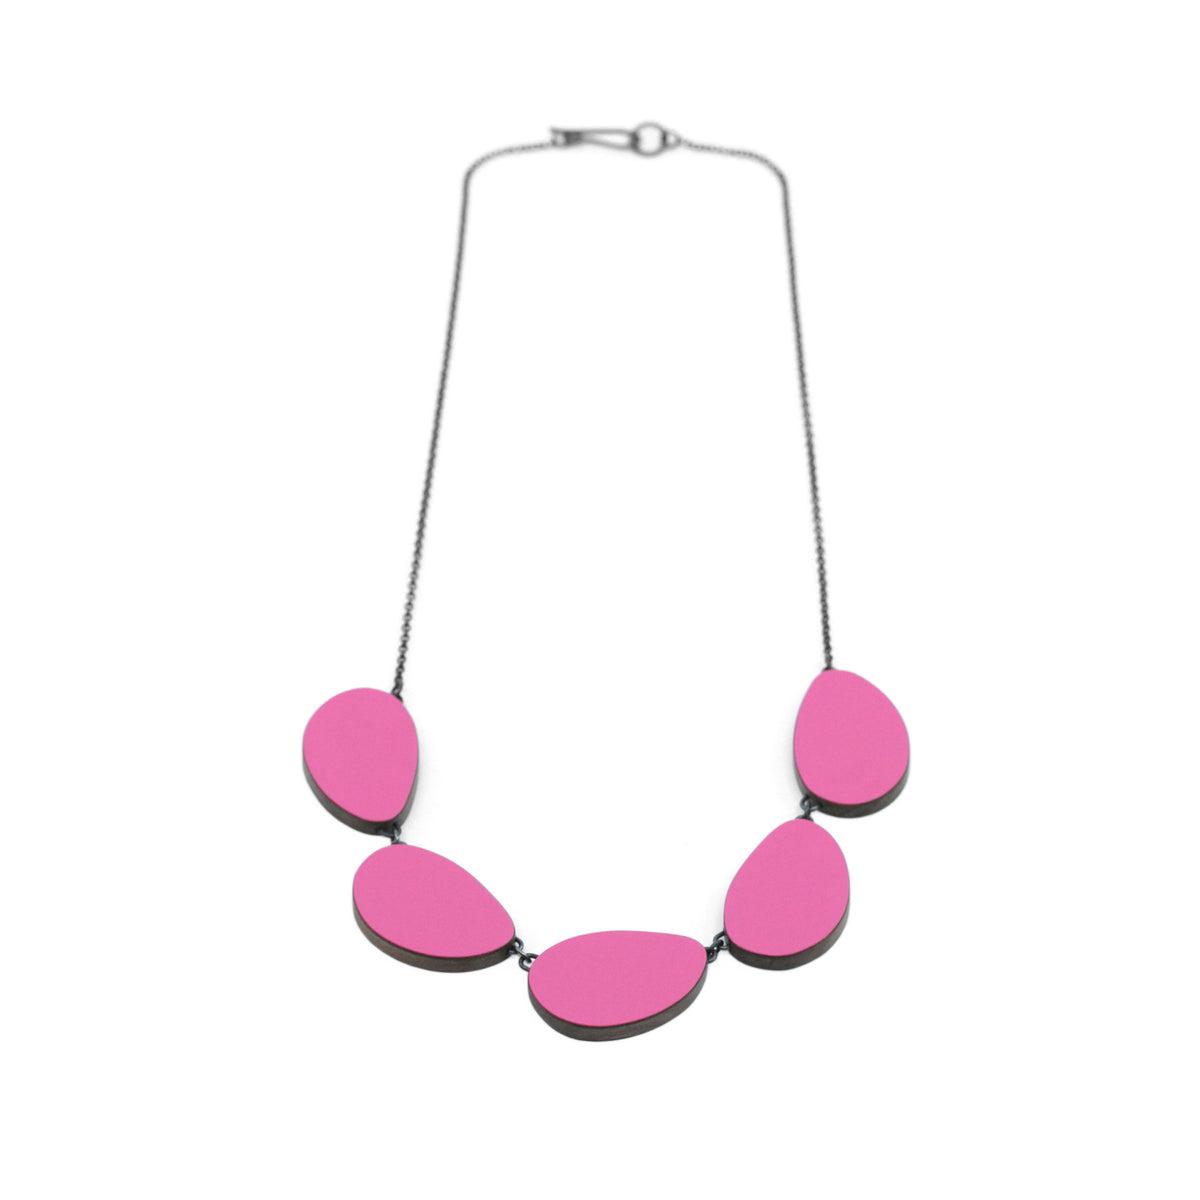 Five part curve necklace (reversible) - pink and orange